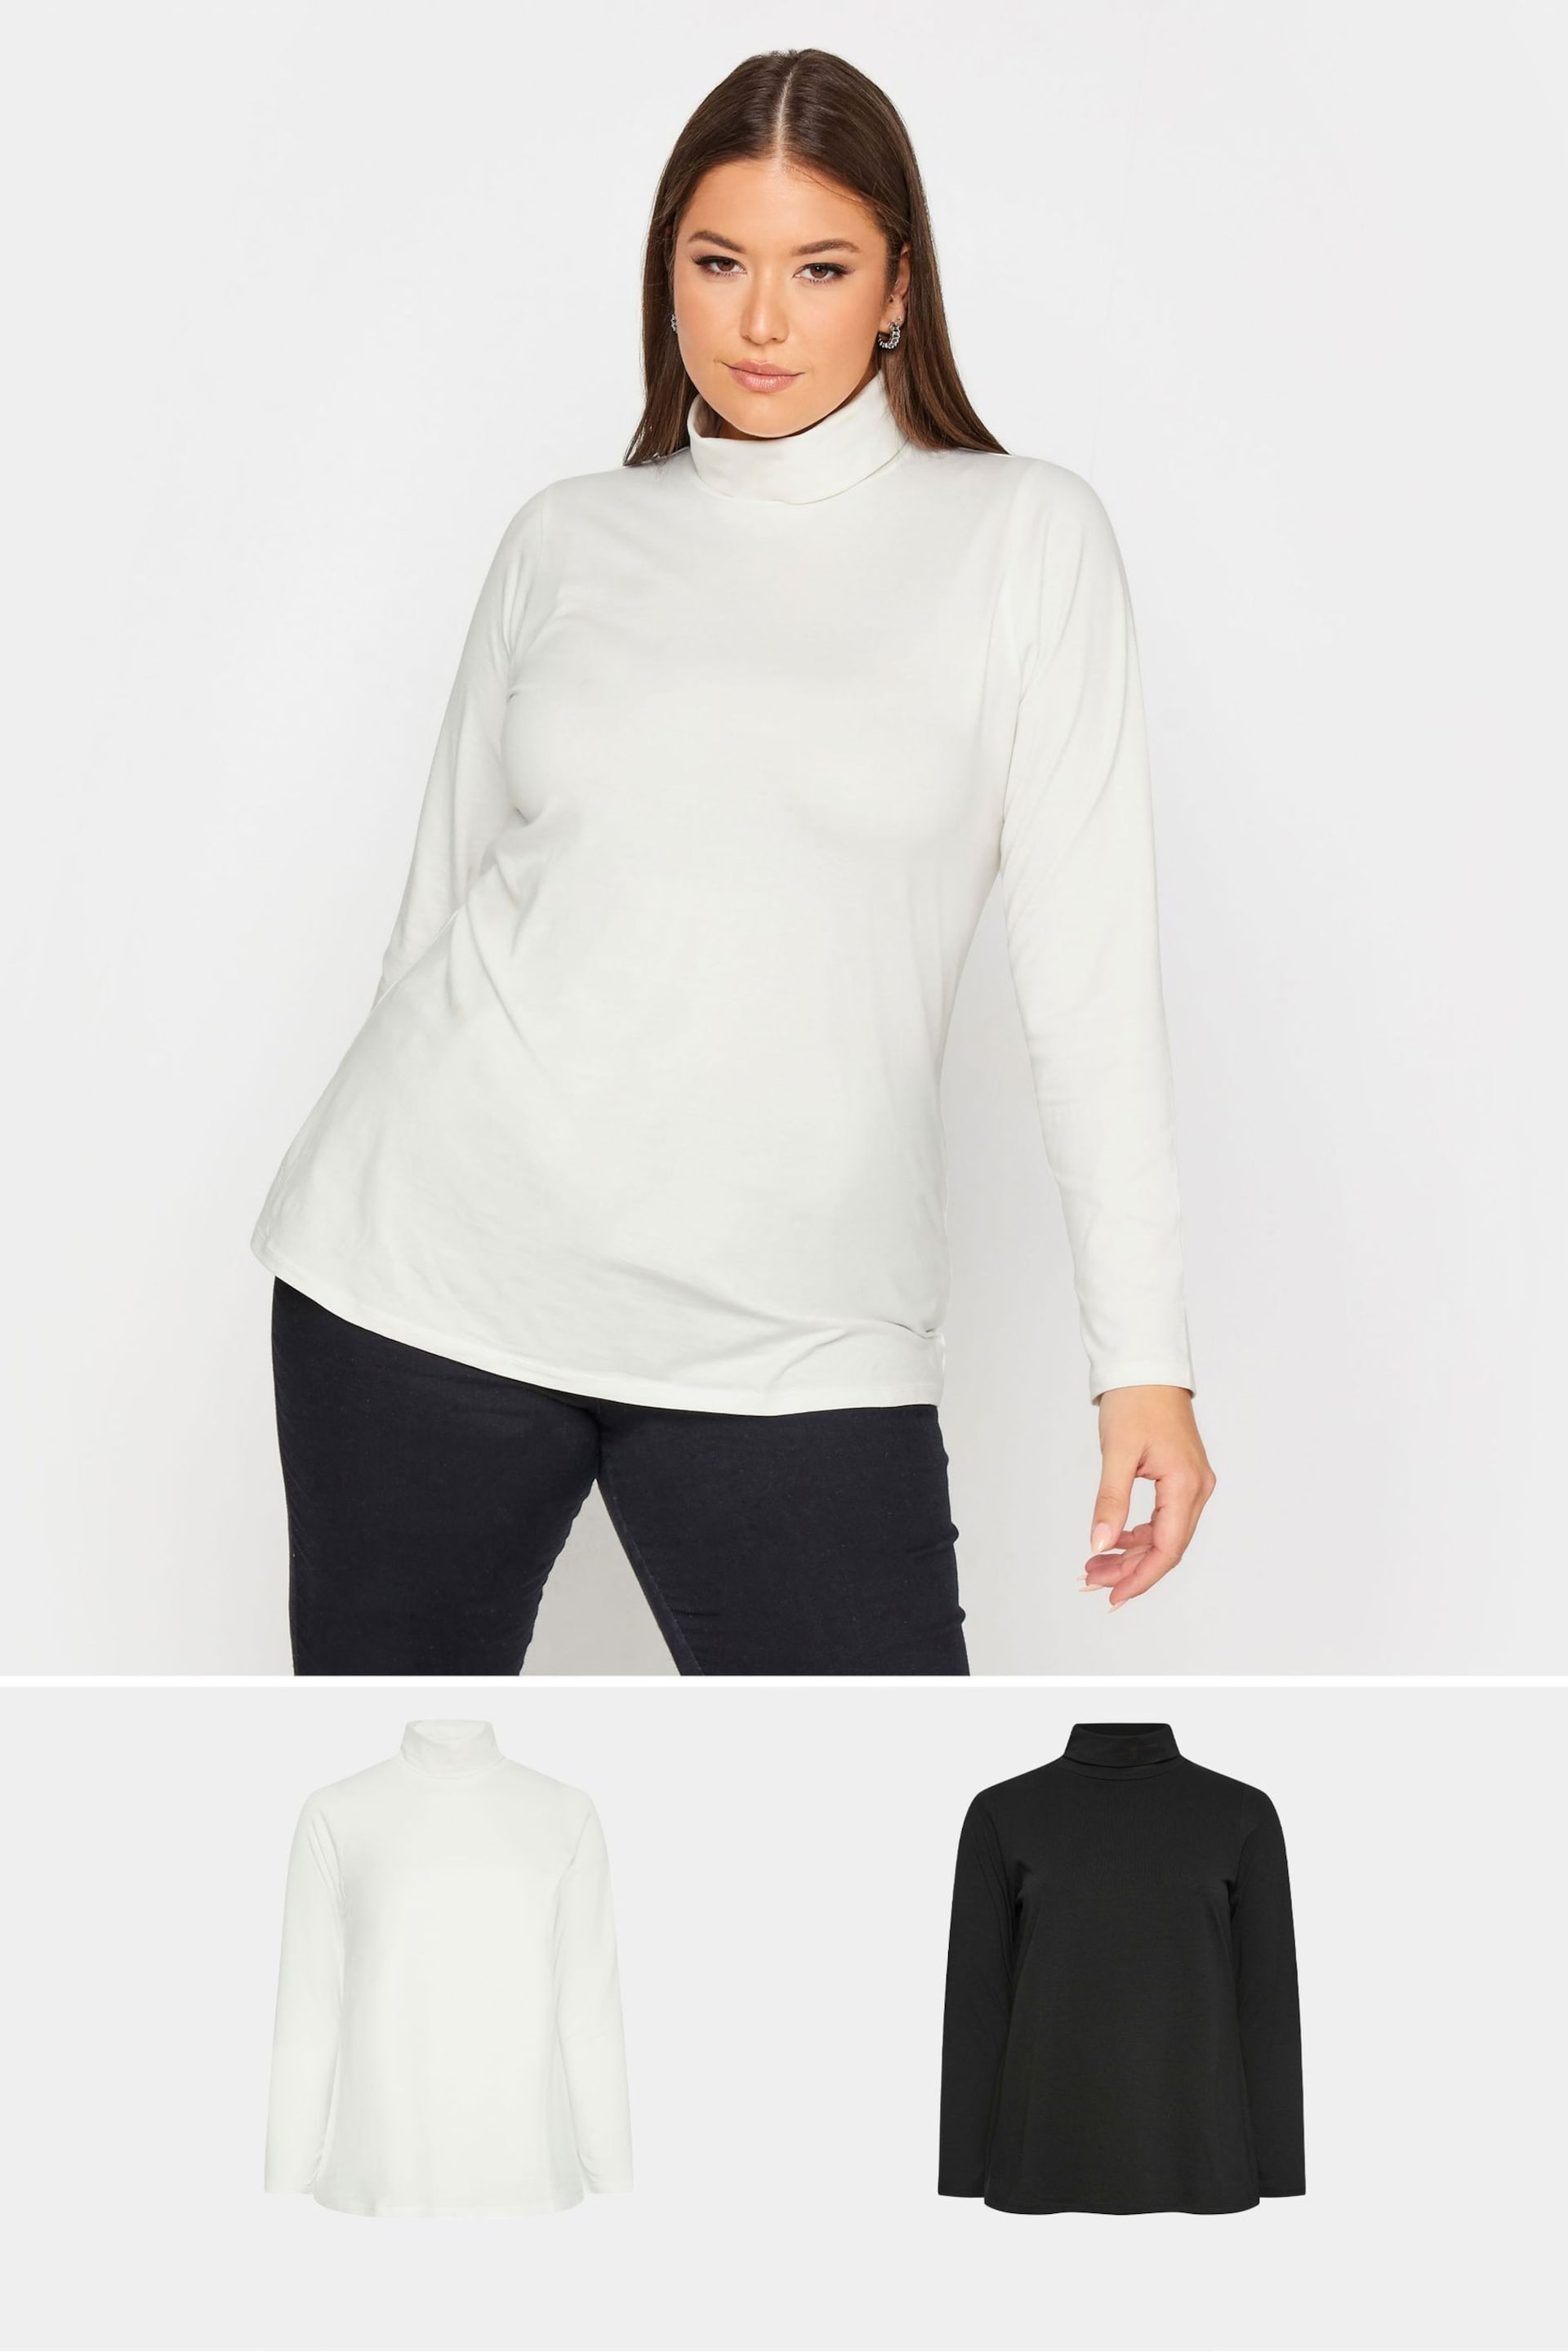 Yours Curve Black Longsleeve Turtle Neck Tops 2 Packs - Image 1 of 5